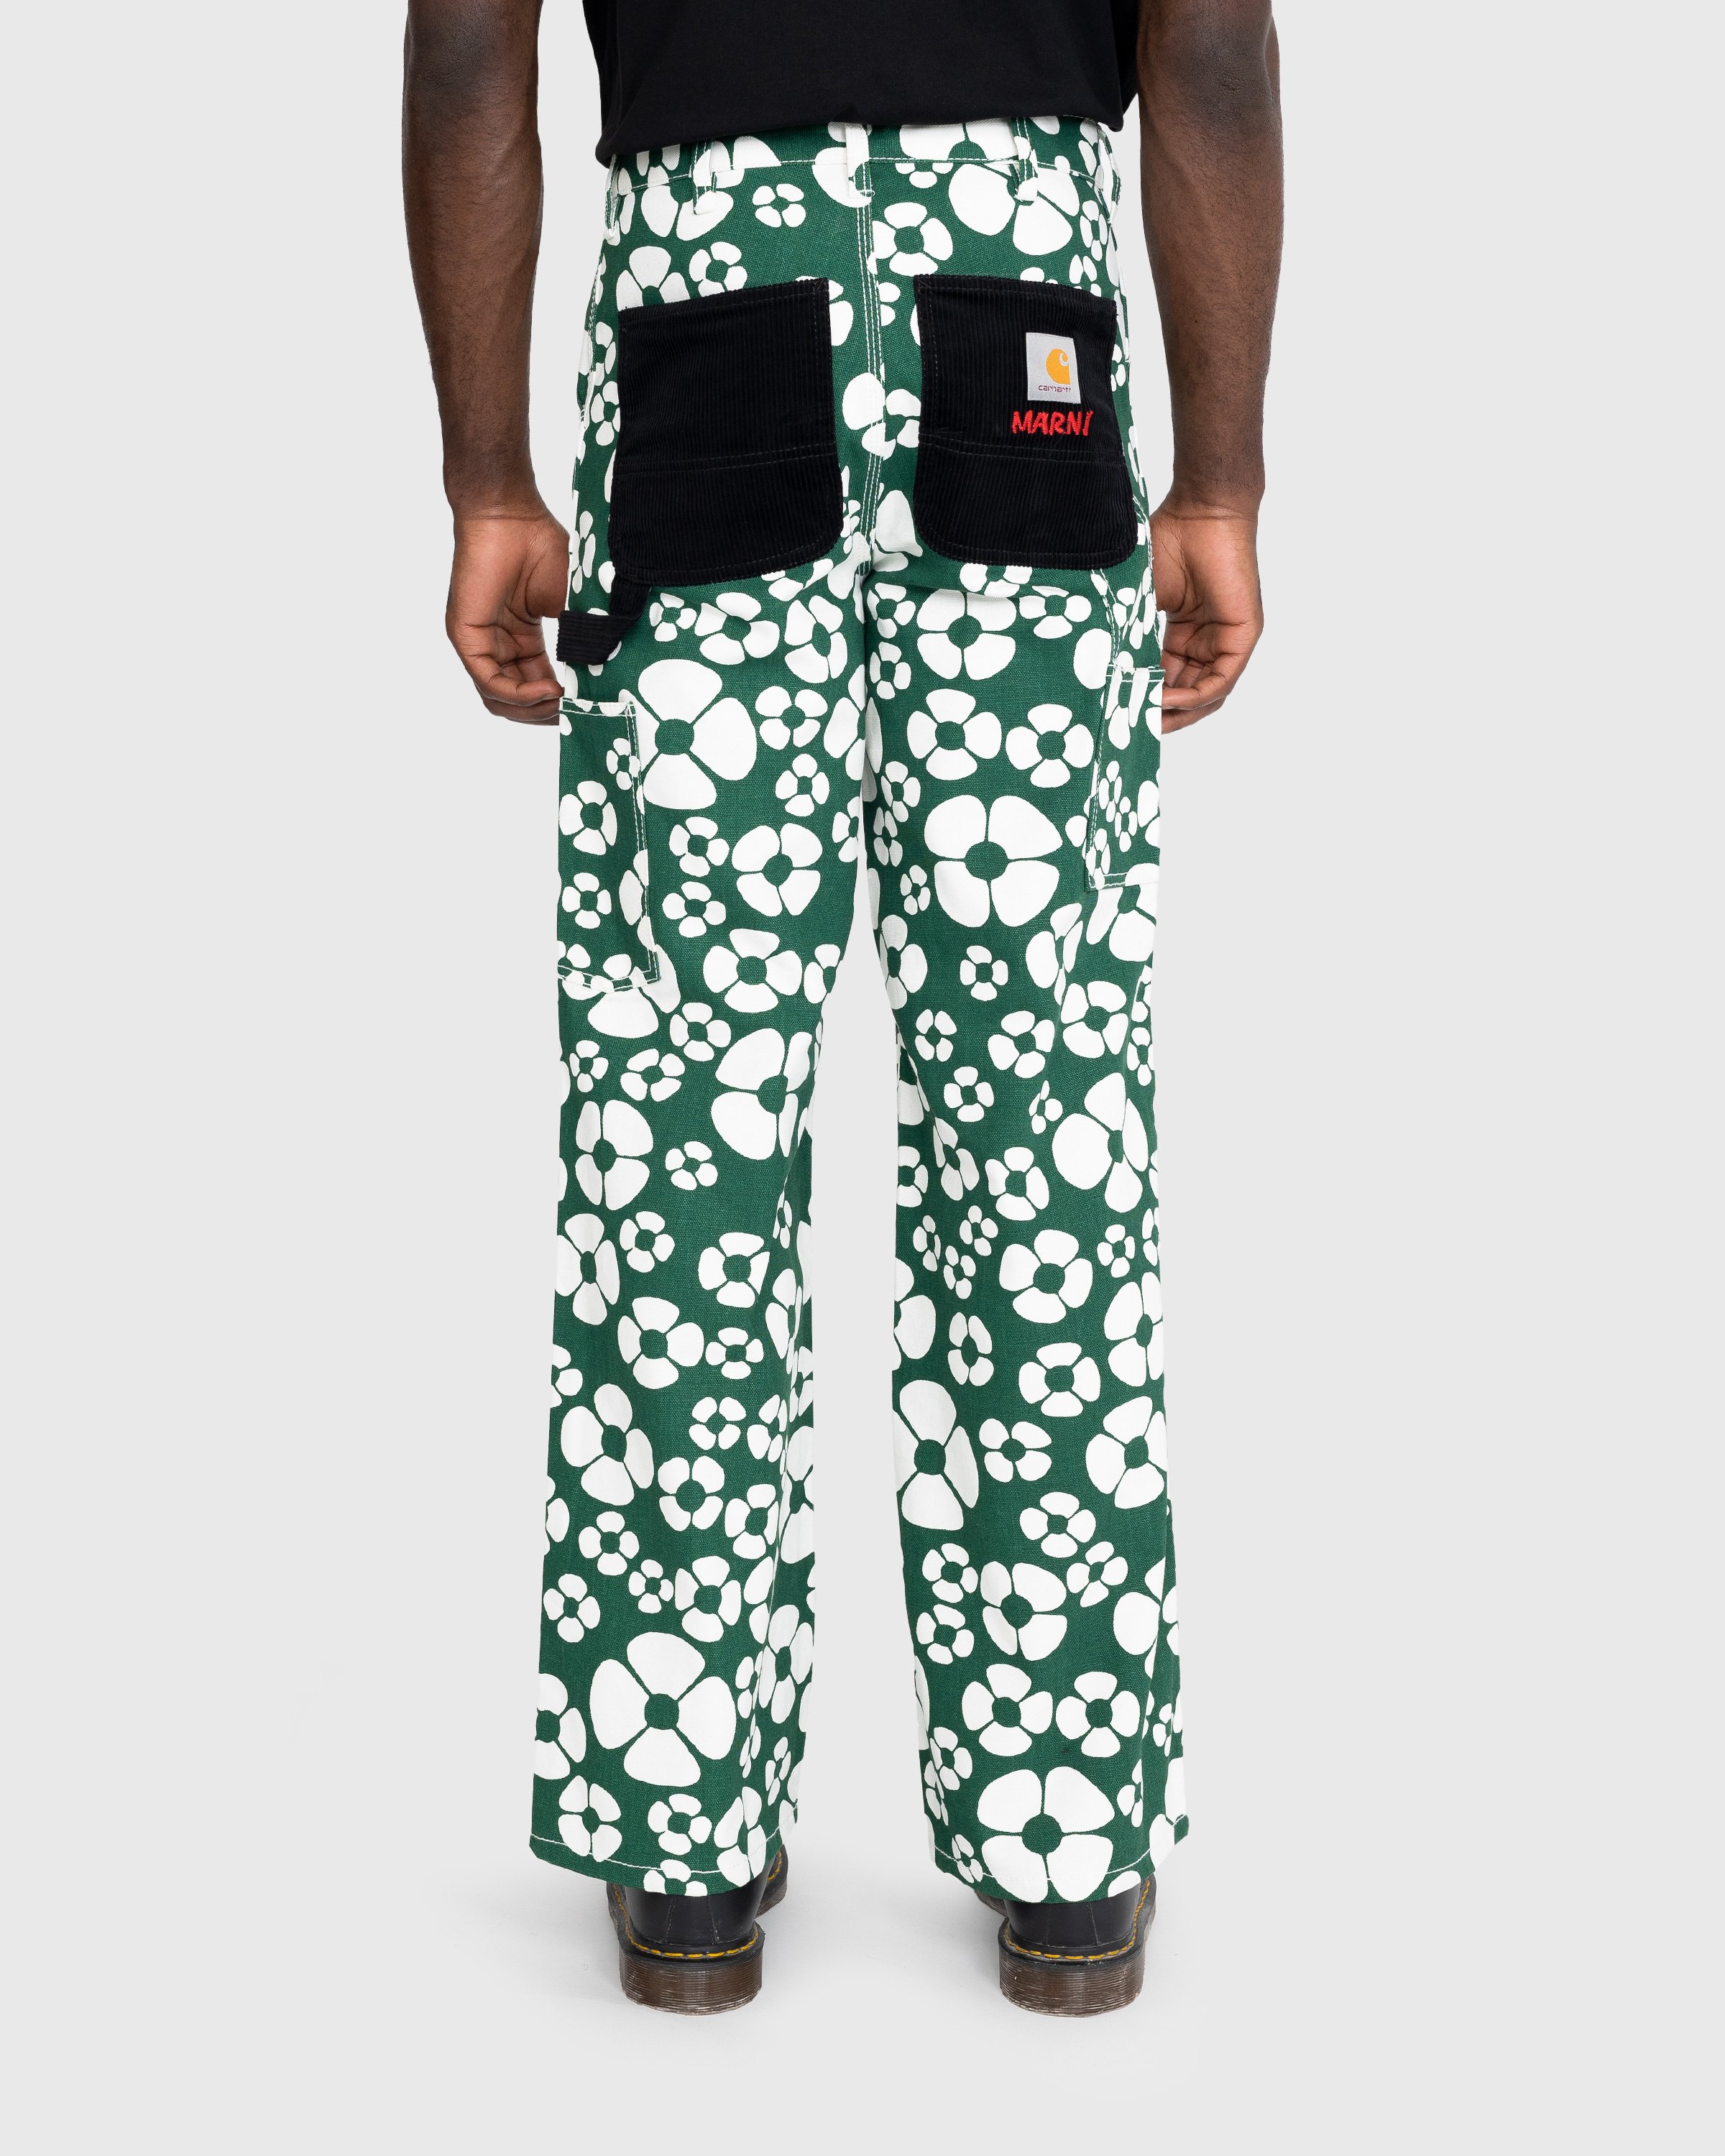 Marni x Carhartt WIP - Floral Trousers Green - Clothing - Green - Image 4